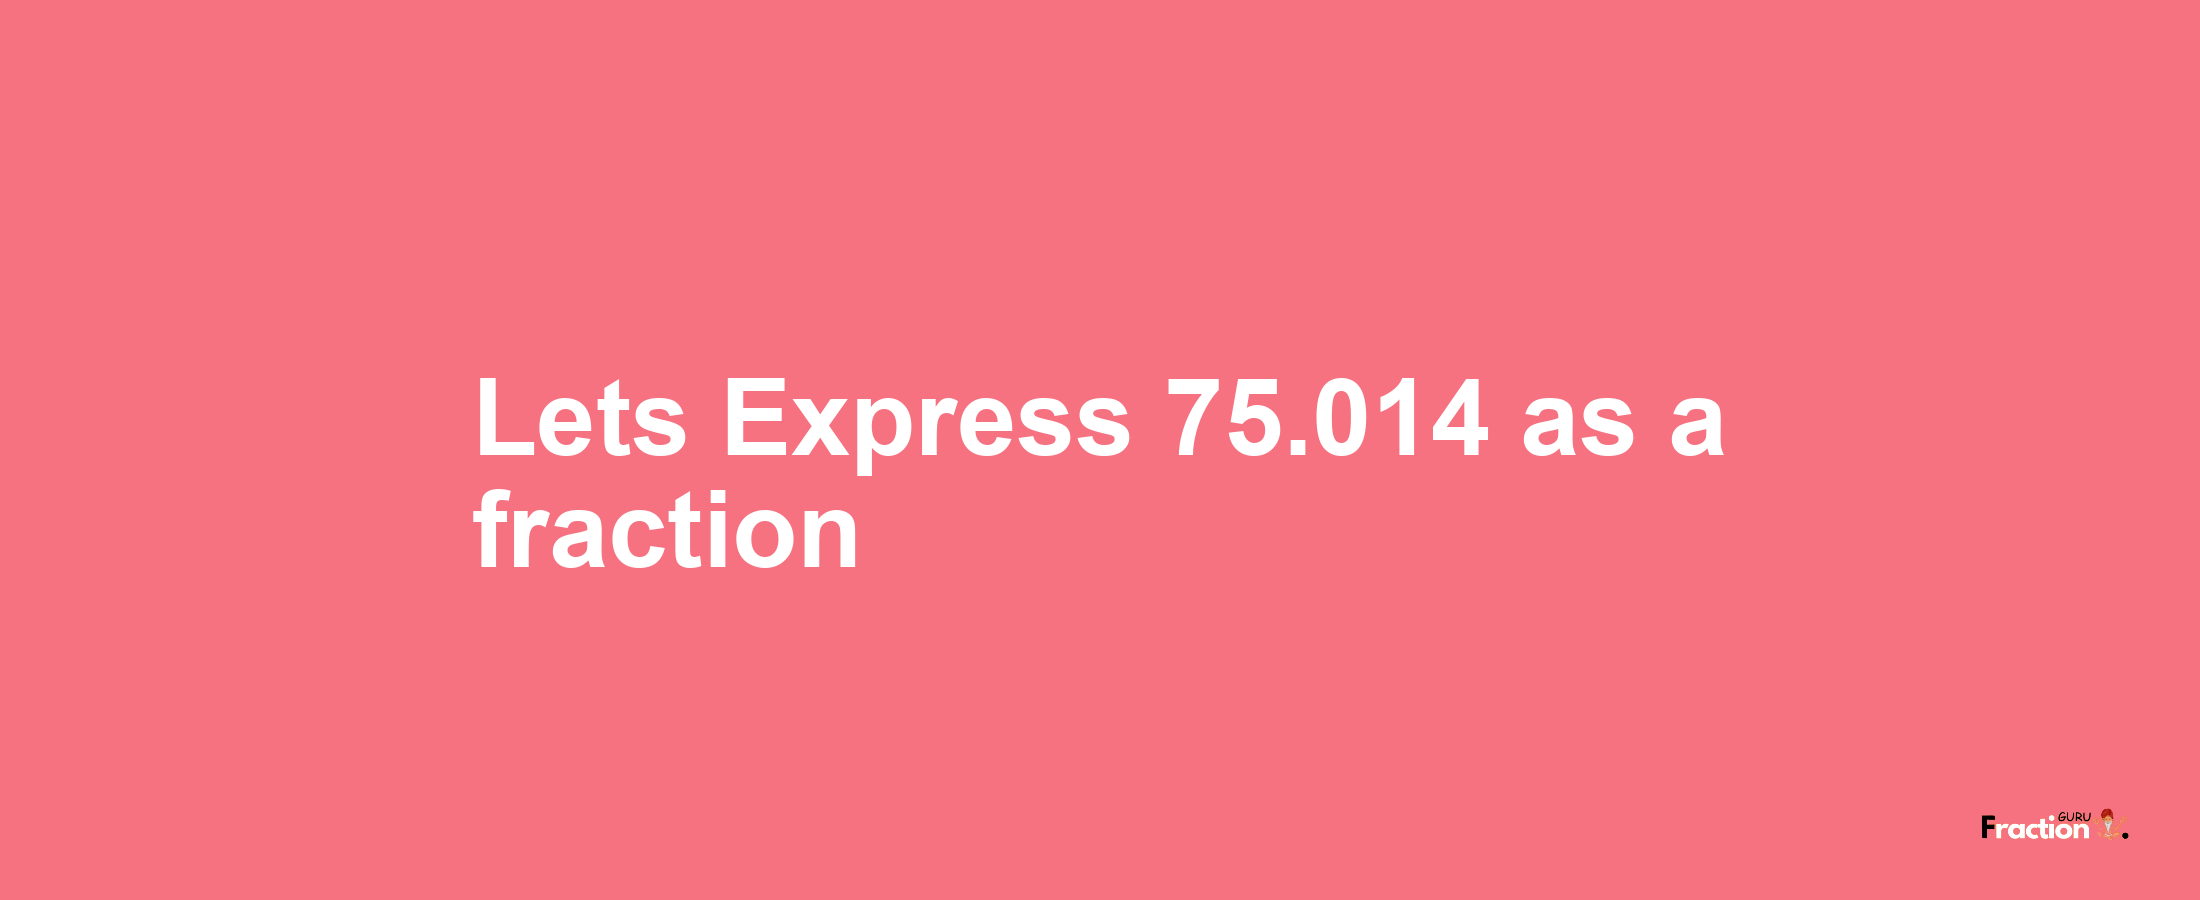 Lets Express 75.014 as afraction